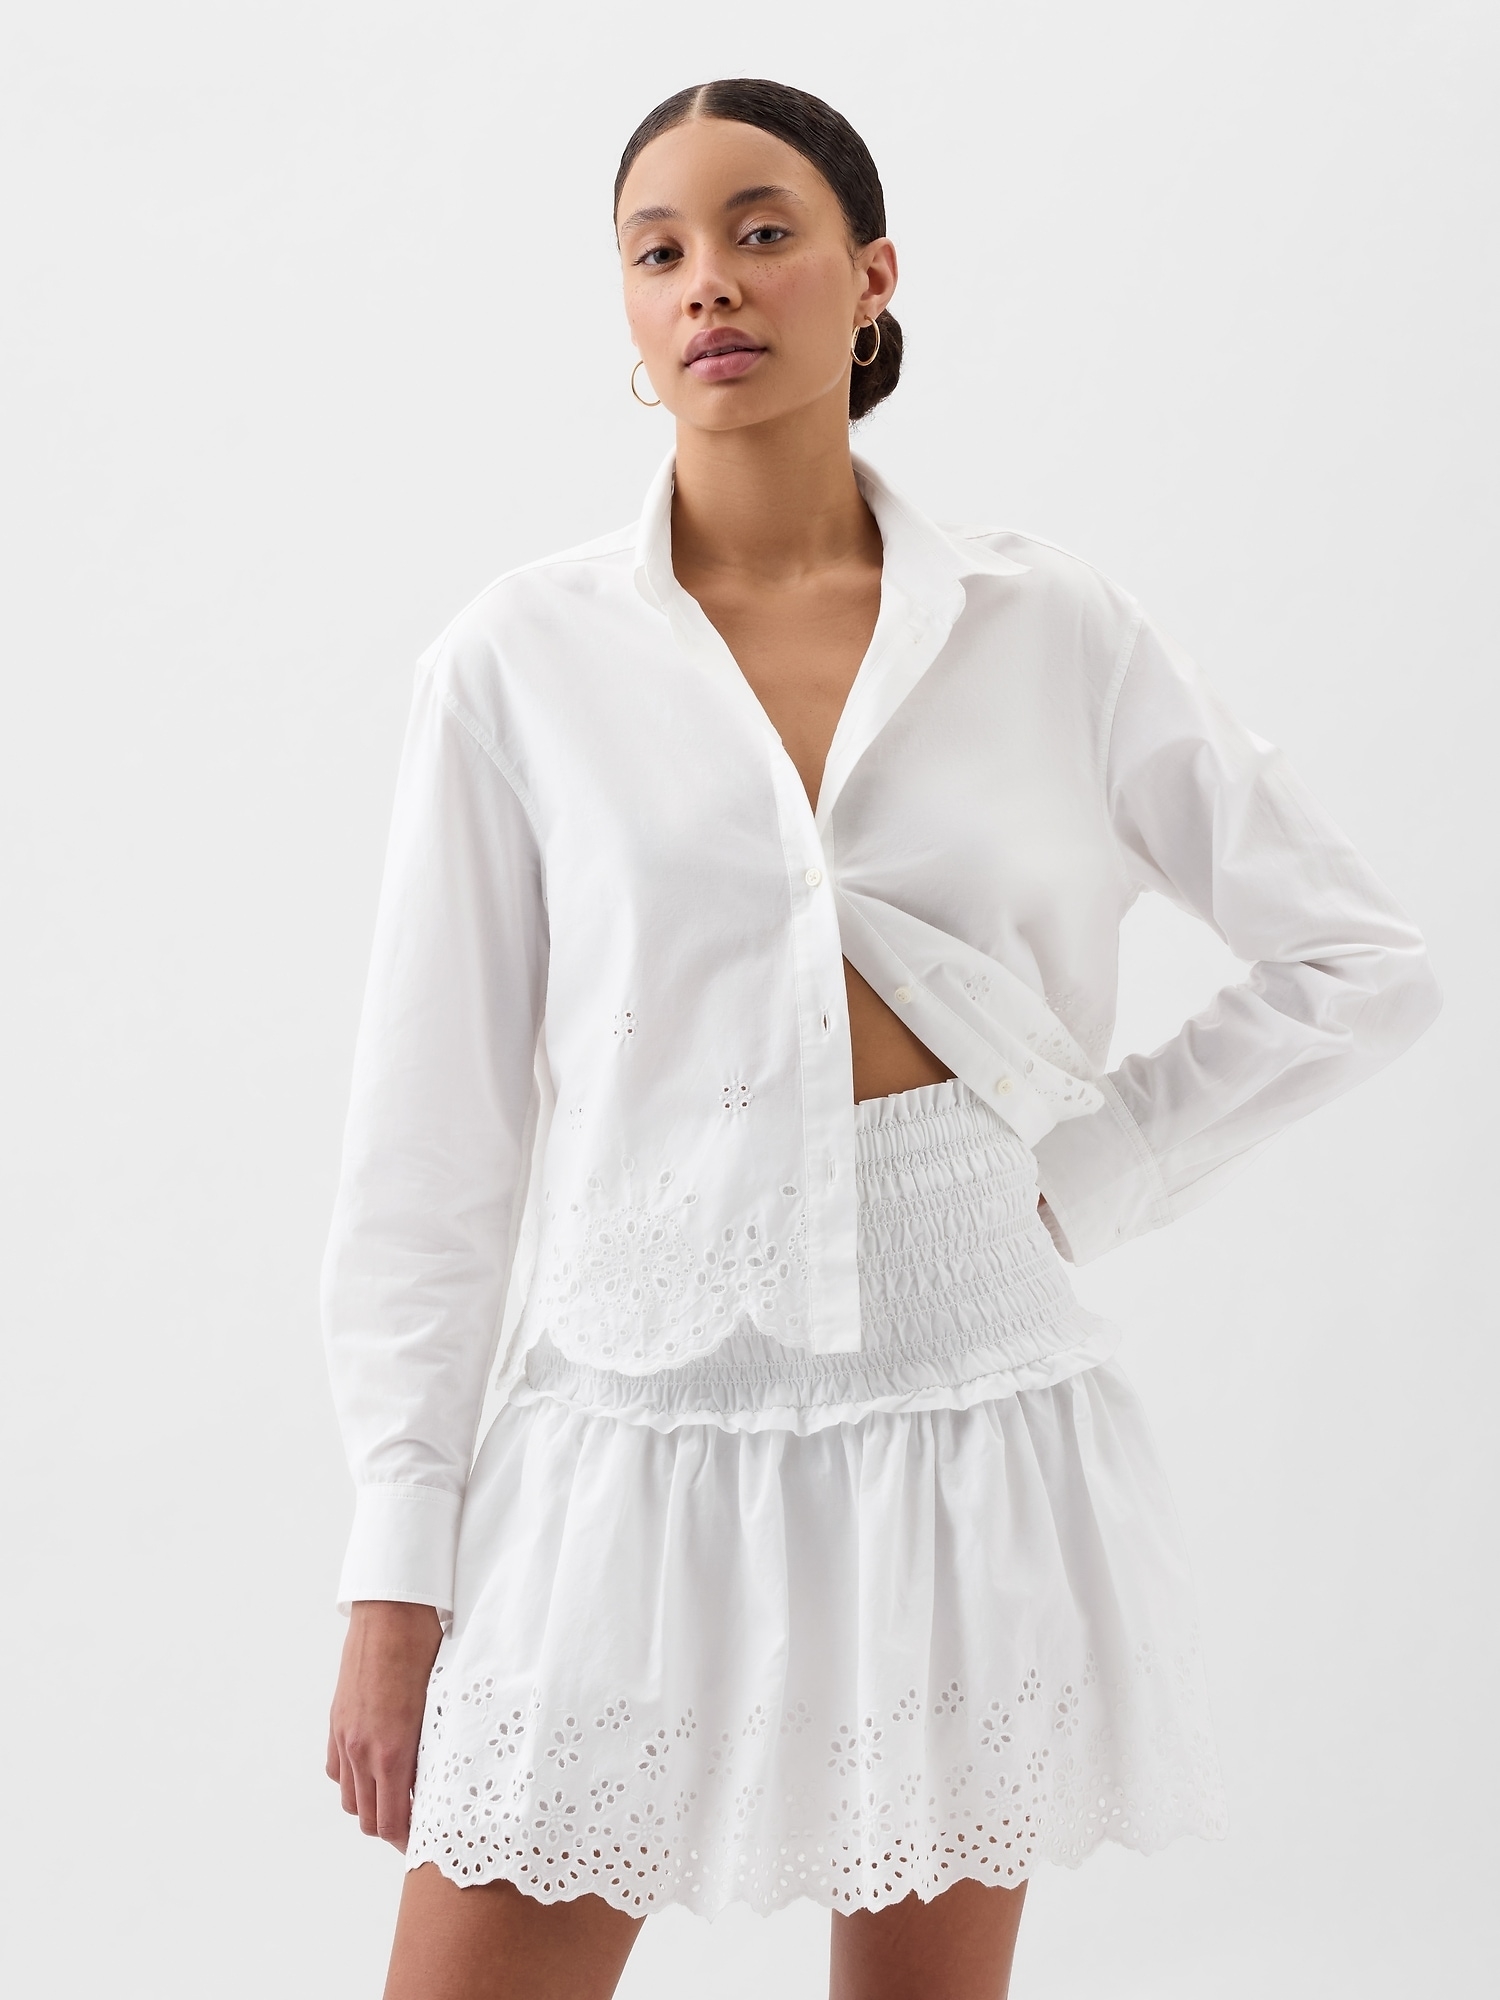 Woman in a white blouse and skirt with eyelet detailing, hand on hip, posing for a shopping article